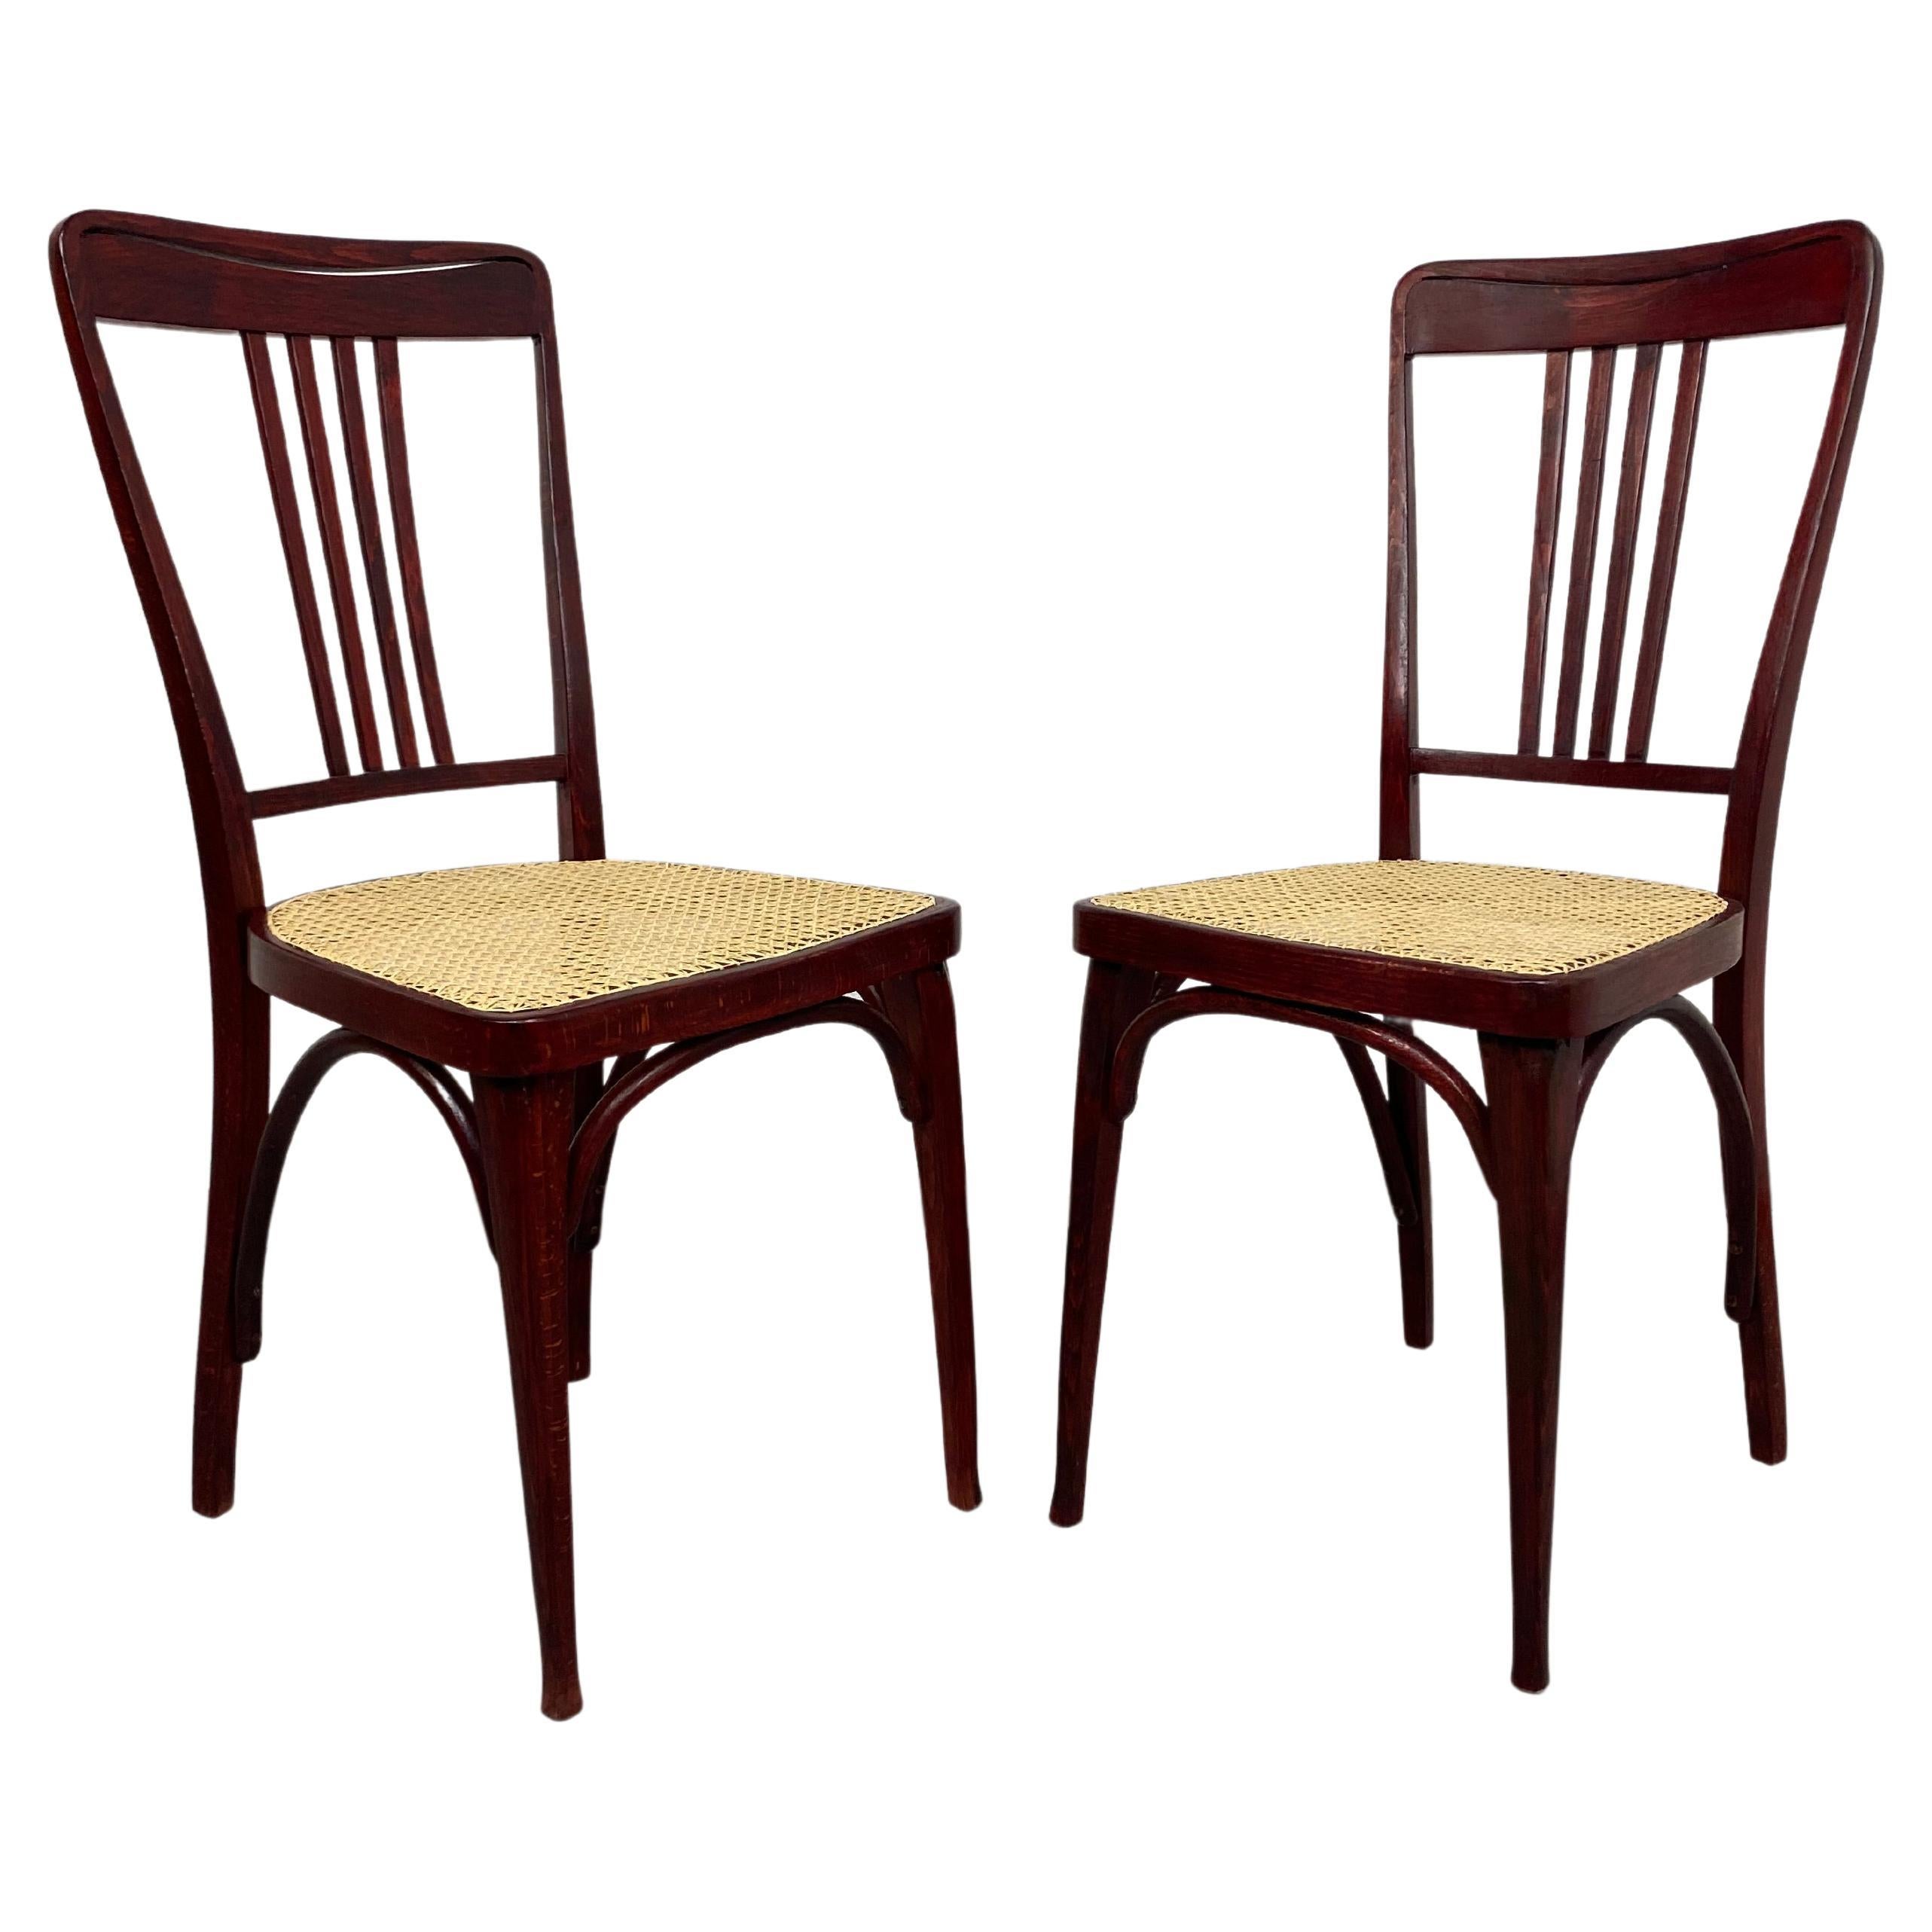 Secession Dining Chairs by Thonet